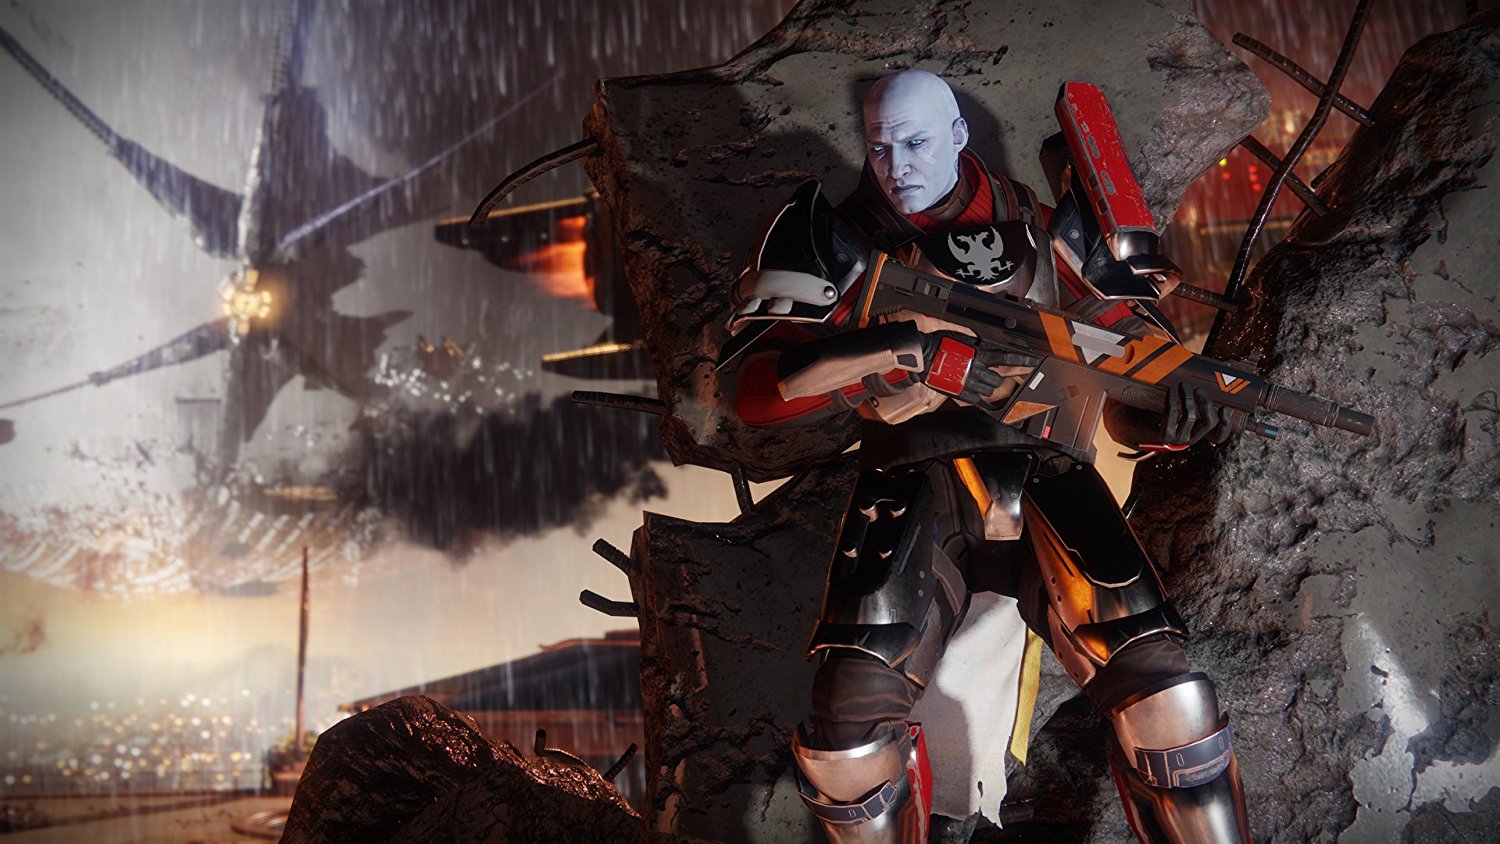 Why can't Destiny 2 Run at 60fps on PS4 Pro?